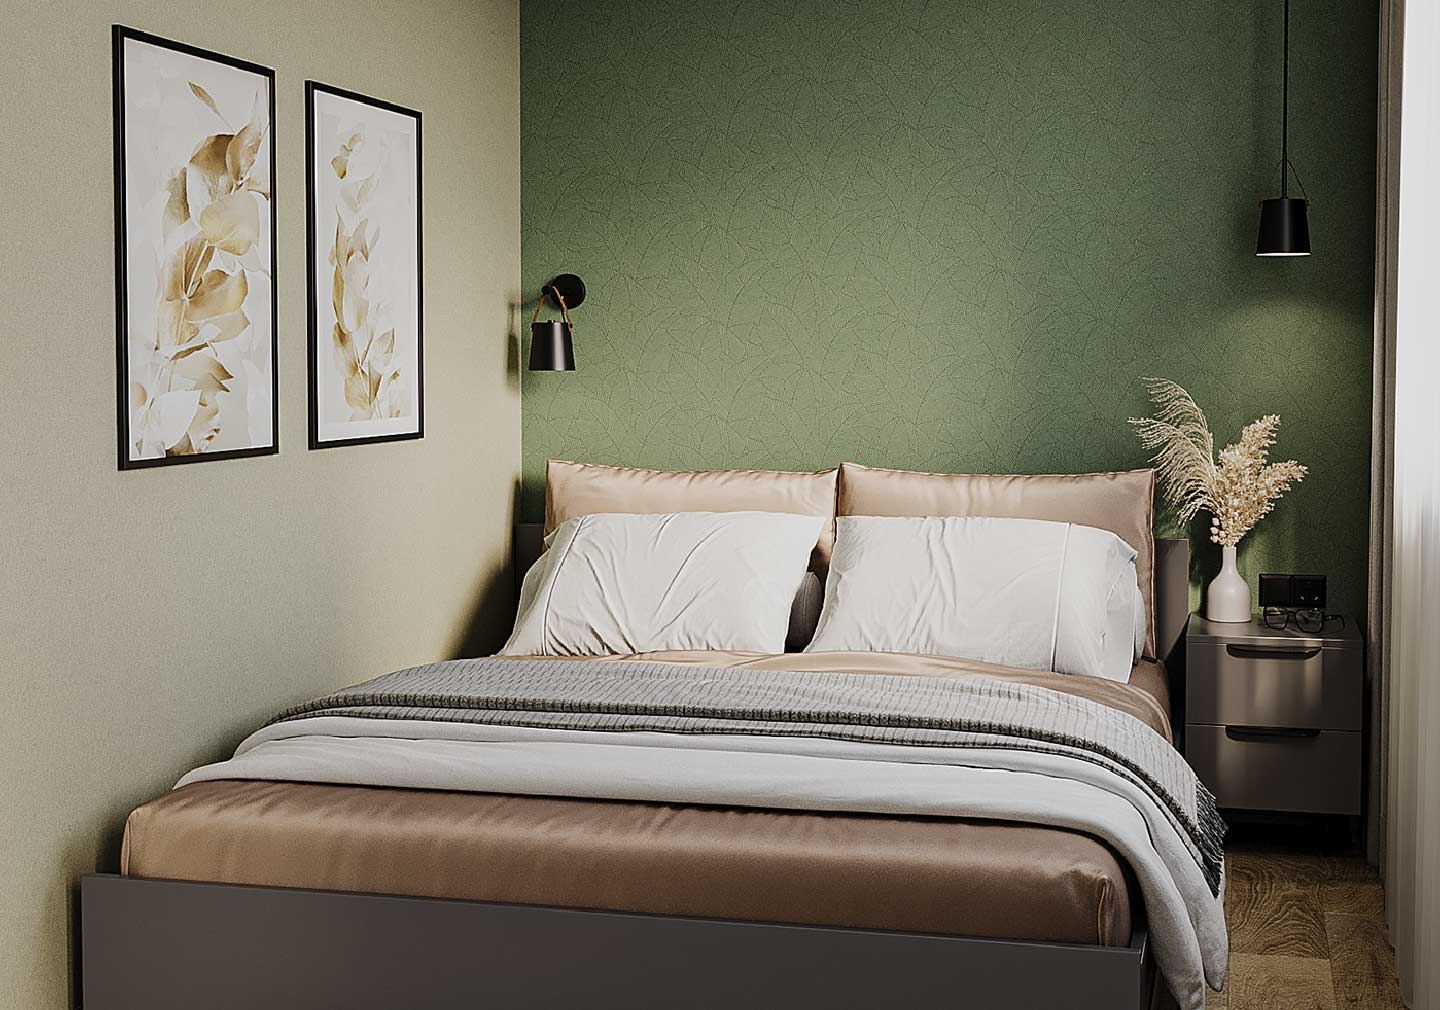  Selecting a Soothing Bedroom Color Palette 